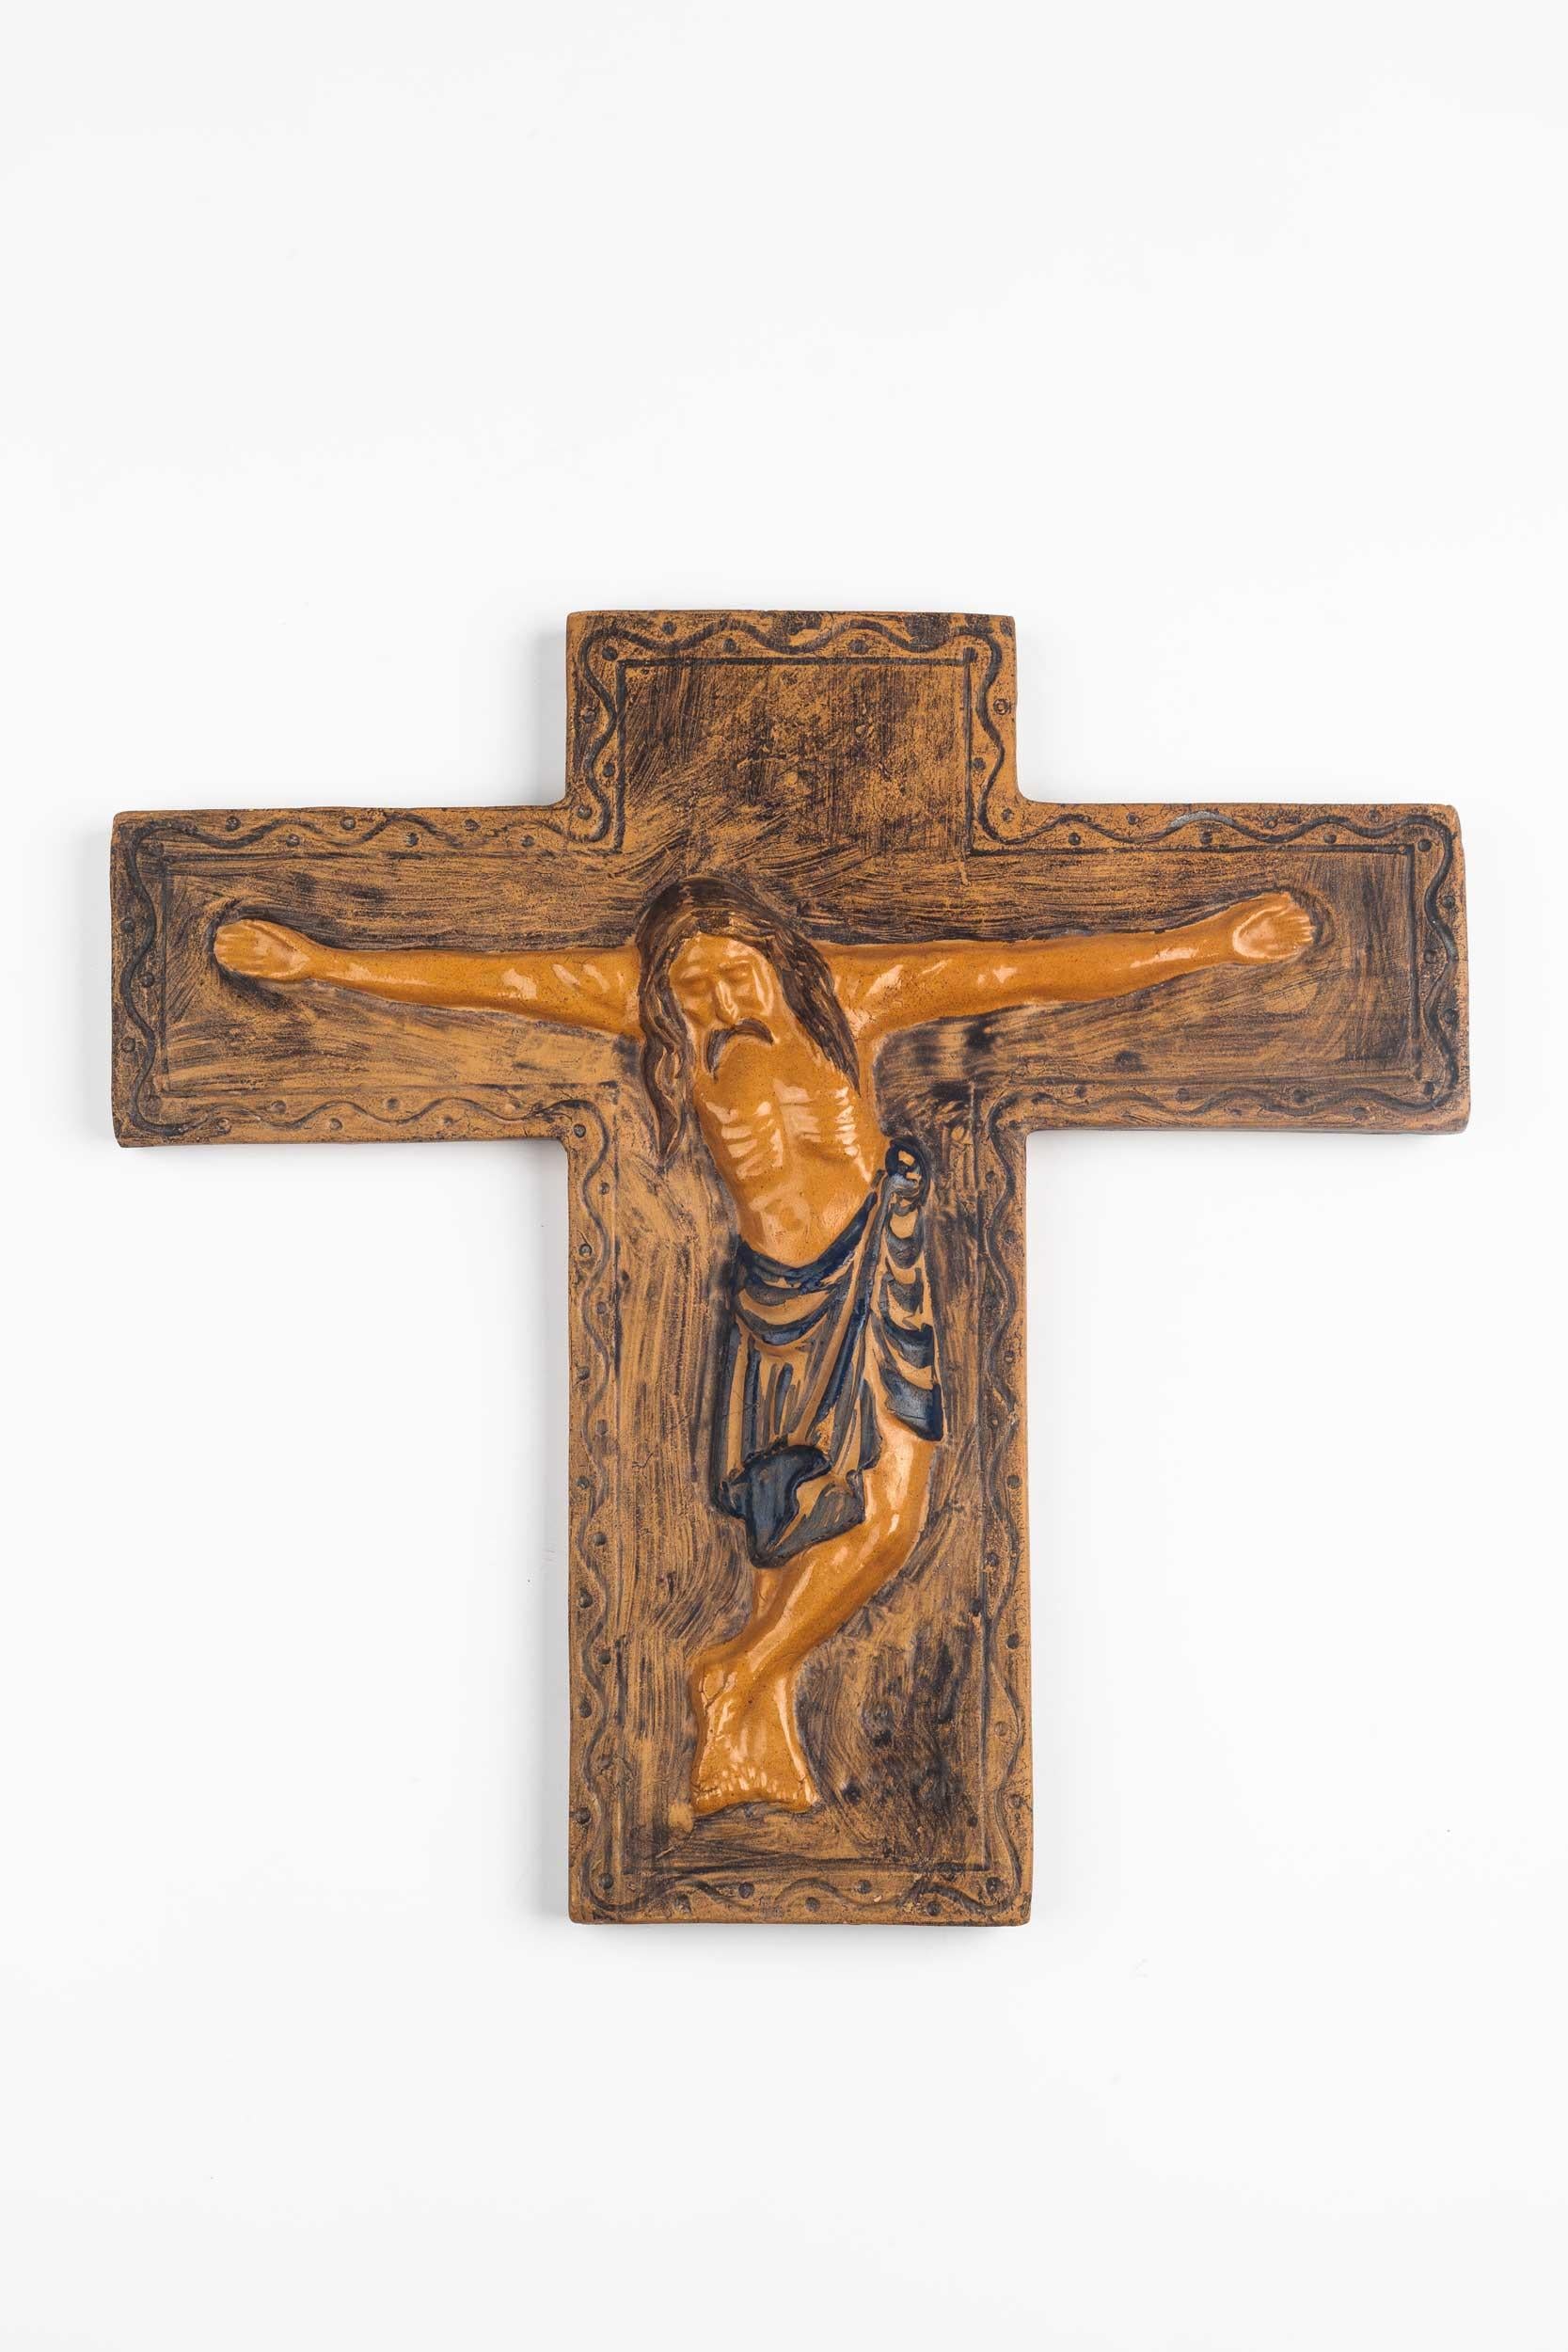 Midcentury European wall crucifix in glazed, hand painted ceramic. From a large collection of vintage crosses handmade by Flemish artisans. 

From modernism to brutalism, the crosses in our collection range from being as futurist as a modernist